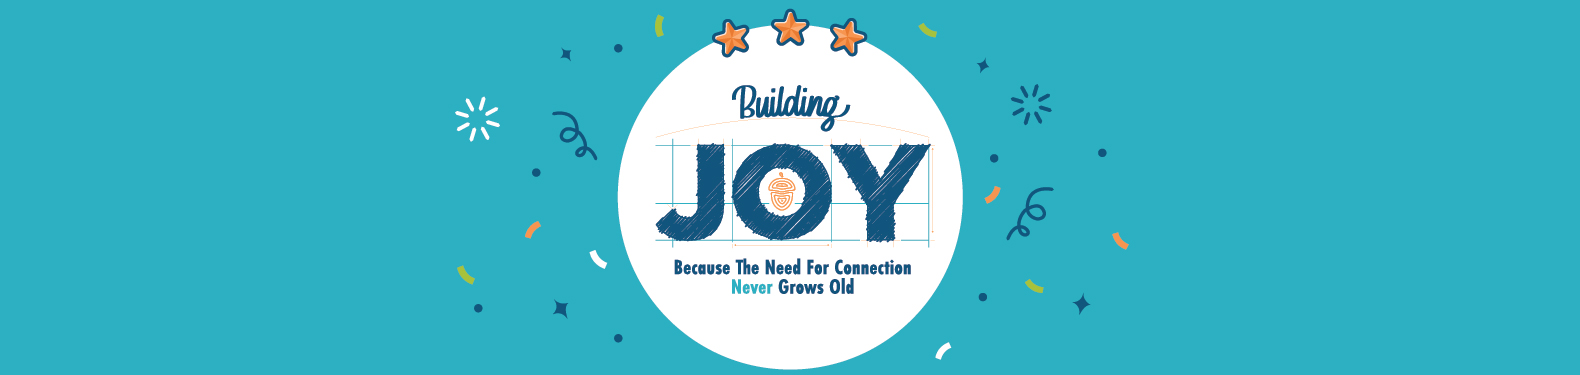 Oakwood Creative Care nonprofit's Building Joy Campaign to support Arizona seniors and older adults with Alzheimer's, dementia, and other cognitive challenges.